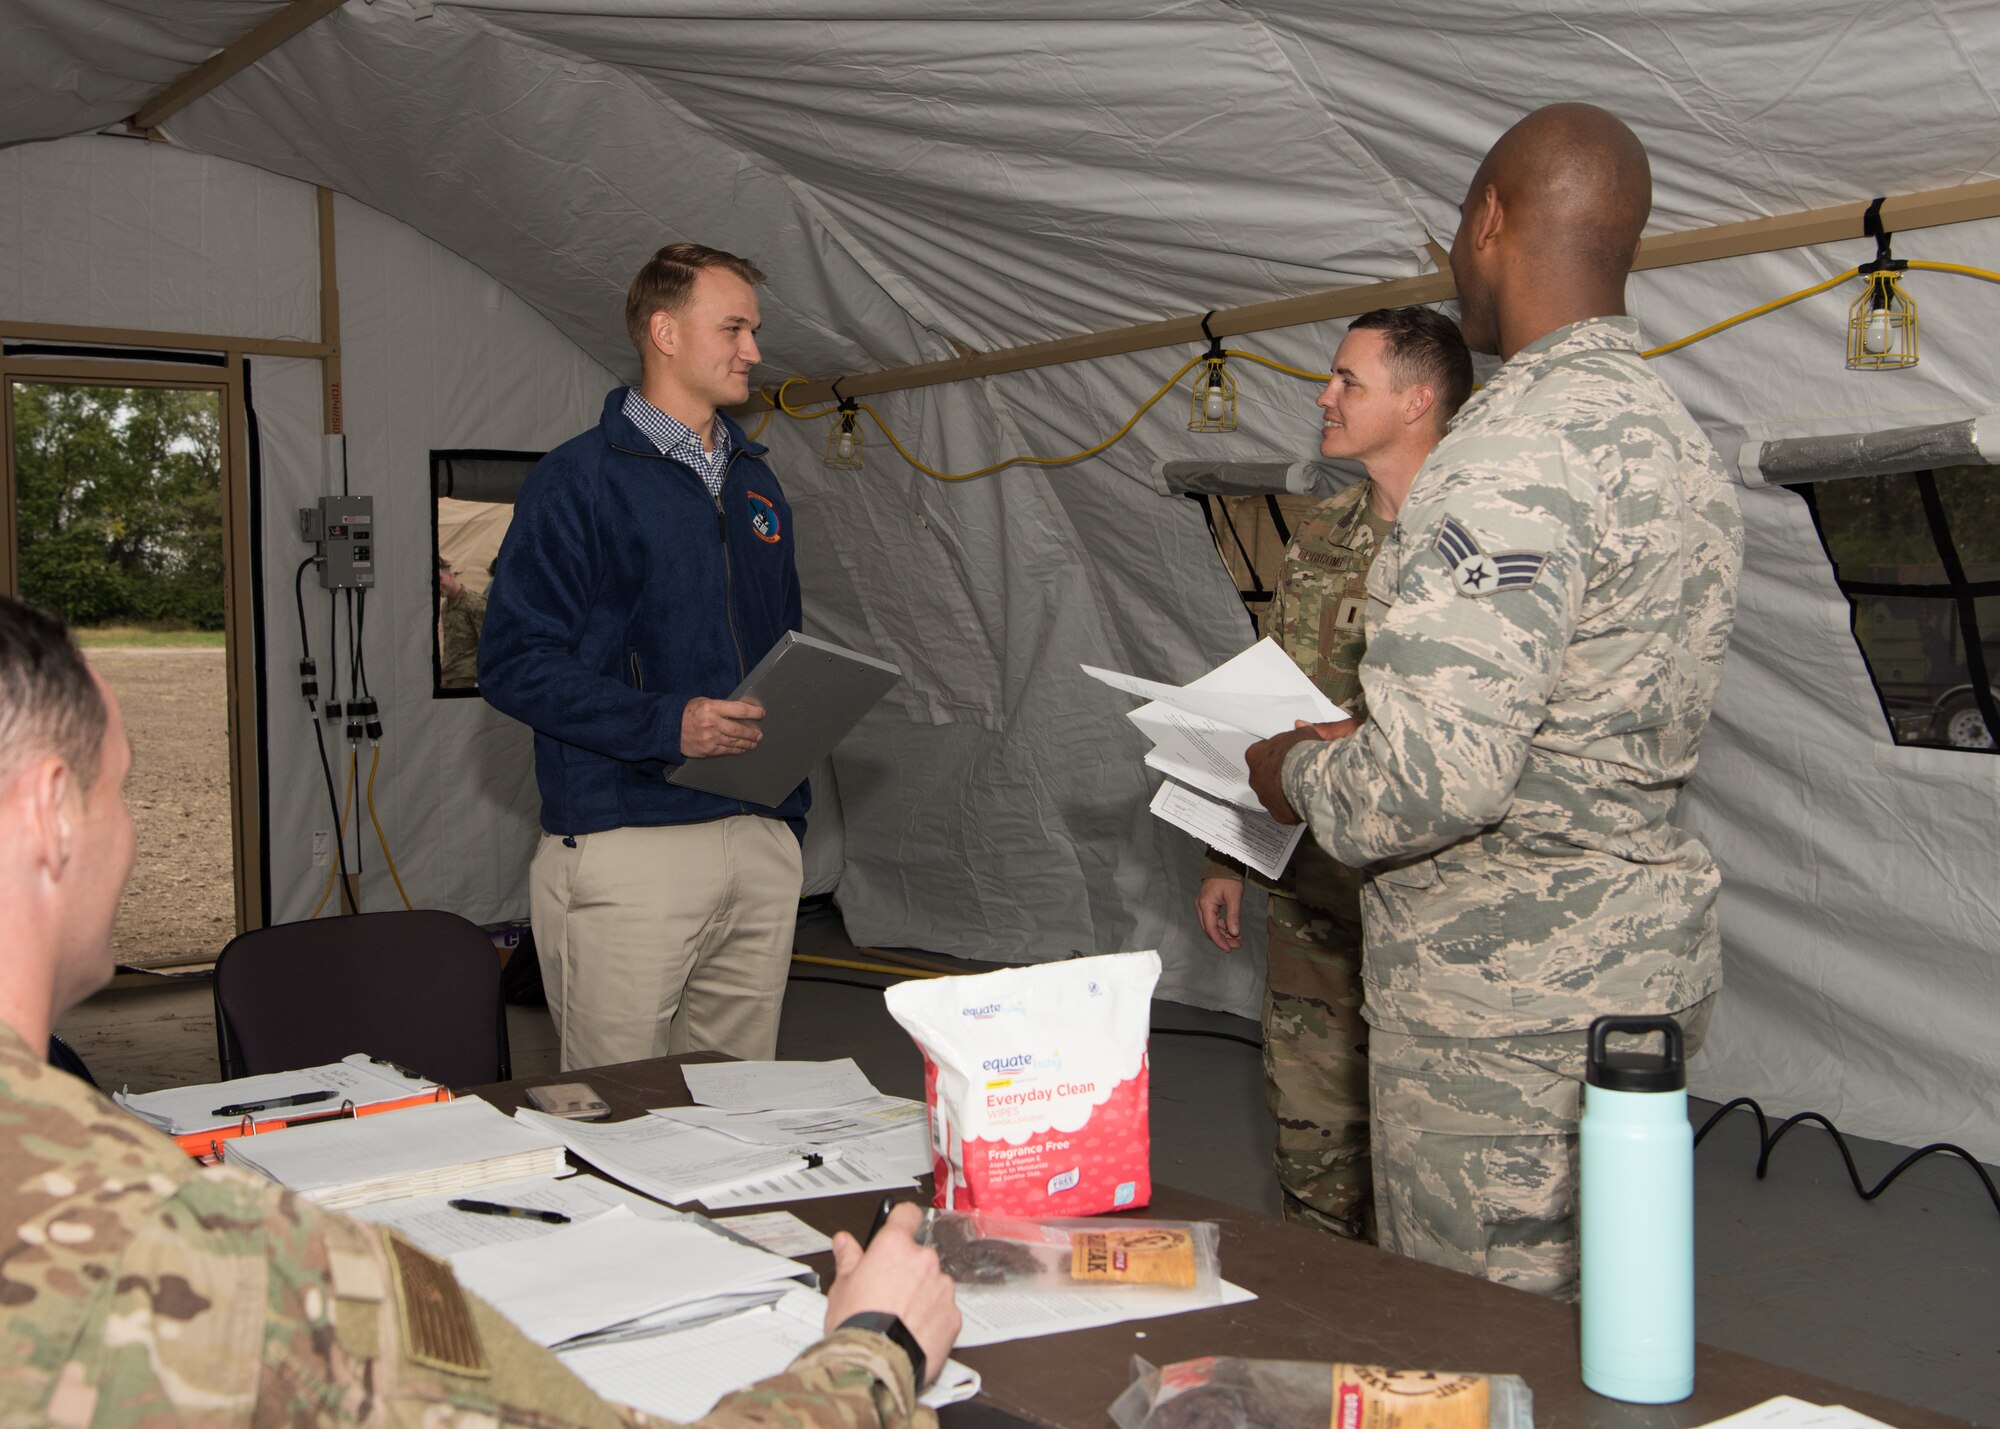 Second Lt. Shawn Edgecomb and Senior Airman Brandon Williams, both contracting administrators with the 509th Contracting Squadron, report to the command tent during a mock deployment exercise, Oct. 9, 2019, at Whiteman Air Force Base, Missouri. Squadron leadership reviewed and evaluated each team’s work throughout the exercise, which challenged them to support the setup of a notional deployed base in Mogadishu, Somalia. (U.S. Air Force photo by Airman 1st Class Parker J. McCauley)